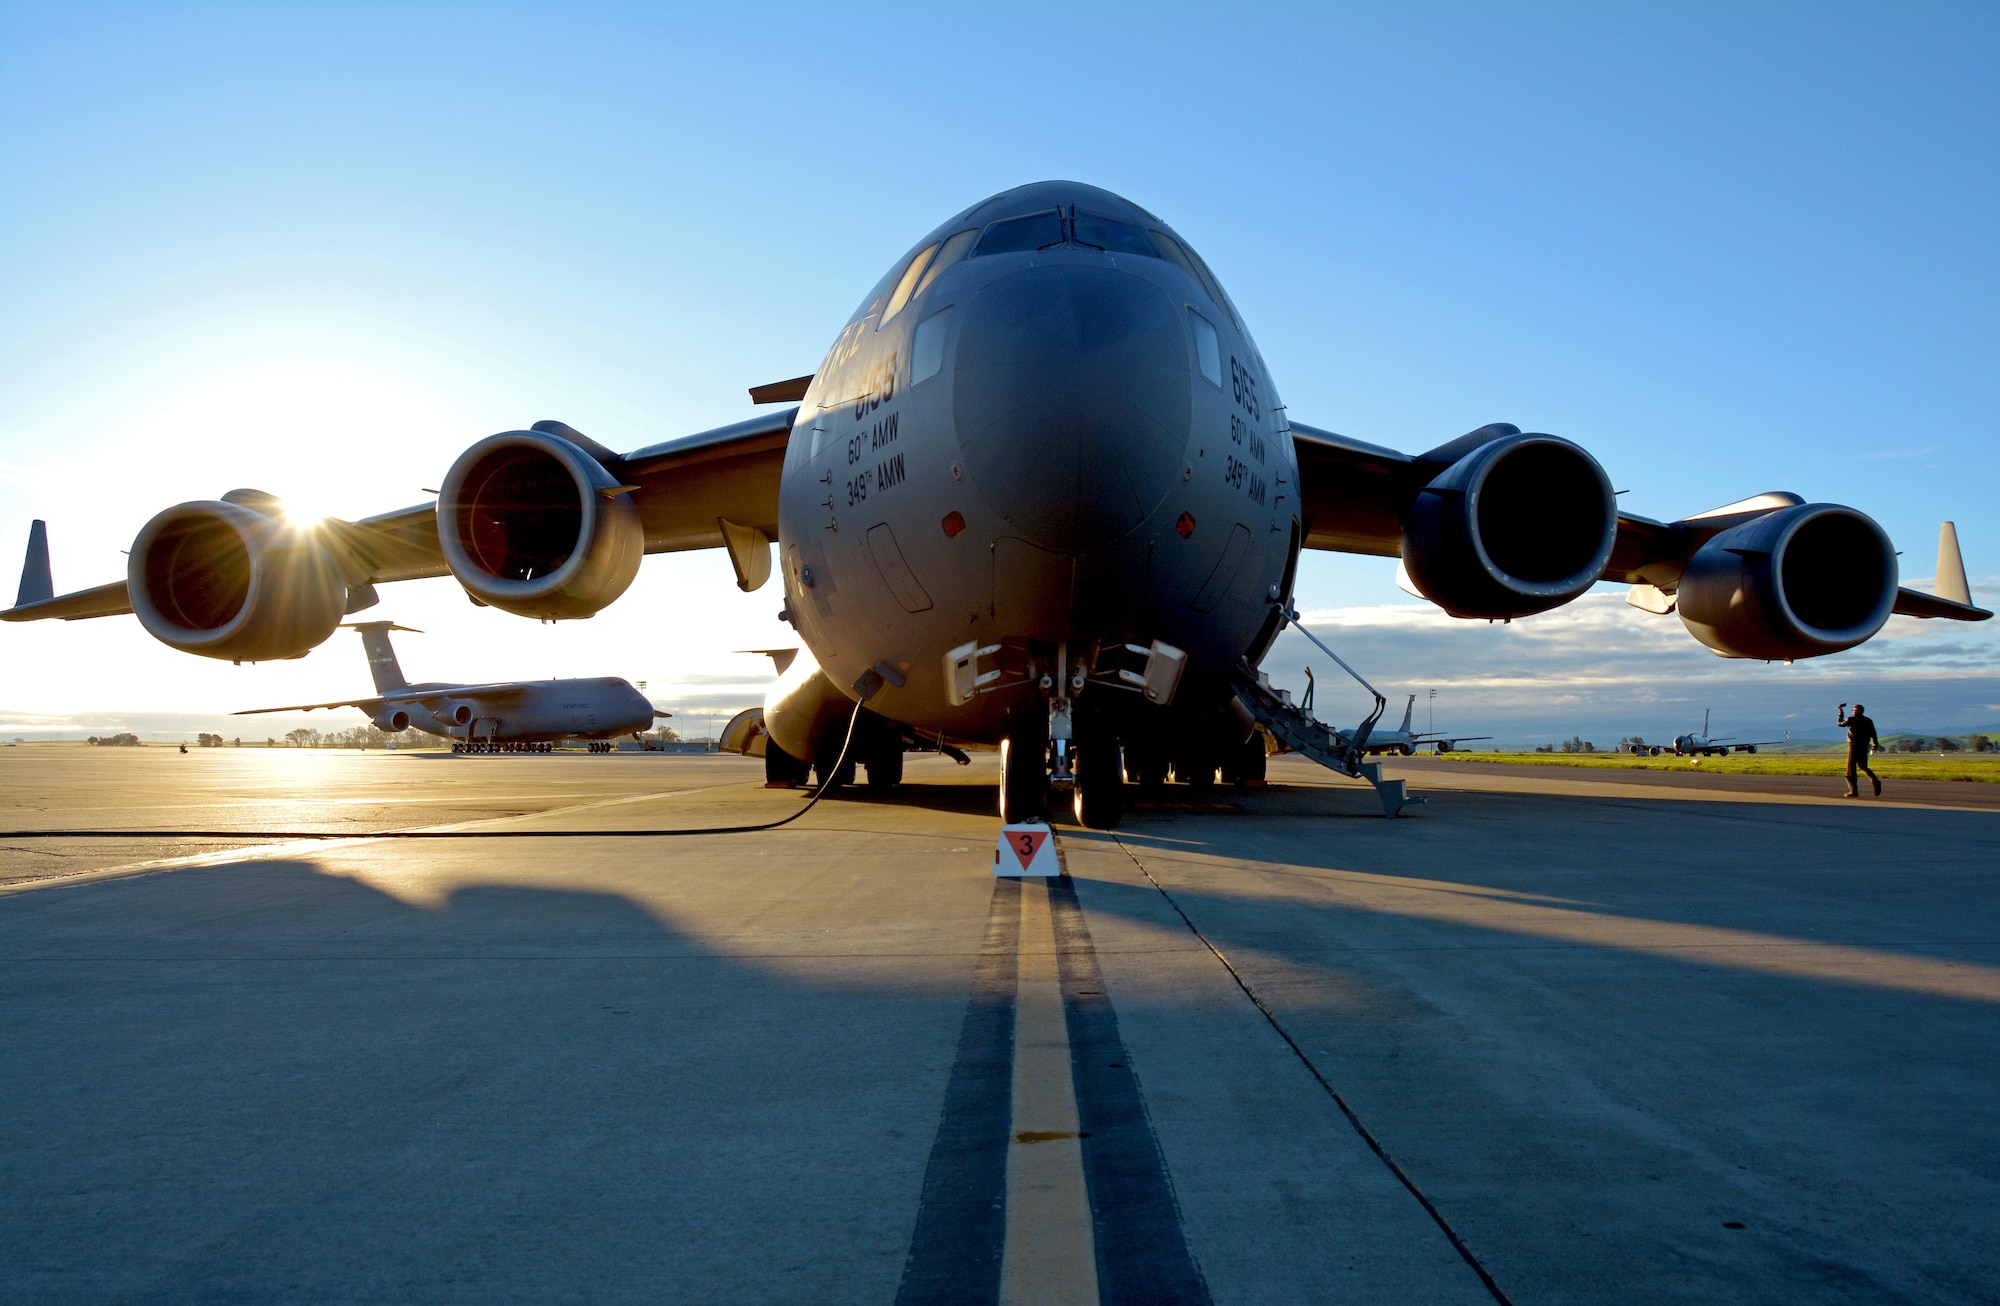 A Citizen Airman assigned to the 301st Airlift Squadron inspects a C-17 Globemaster III prior to take off for Patriot Wyvern during the February drill weekend at Travis Air Force Base, Calif., on Feb. 11, 2017. Patriot Wyvern is a hands-on, bi-annual event conducted by the 349th Air Mobility Wing designed to hone combat skills and improve organizational interoperability. (U.S. Air Force photo/Staff Sgt. Daniel Phelps)